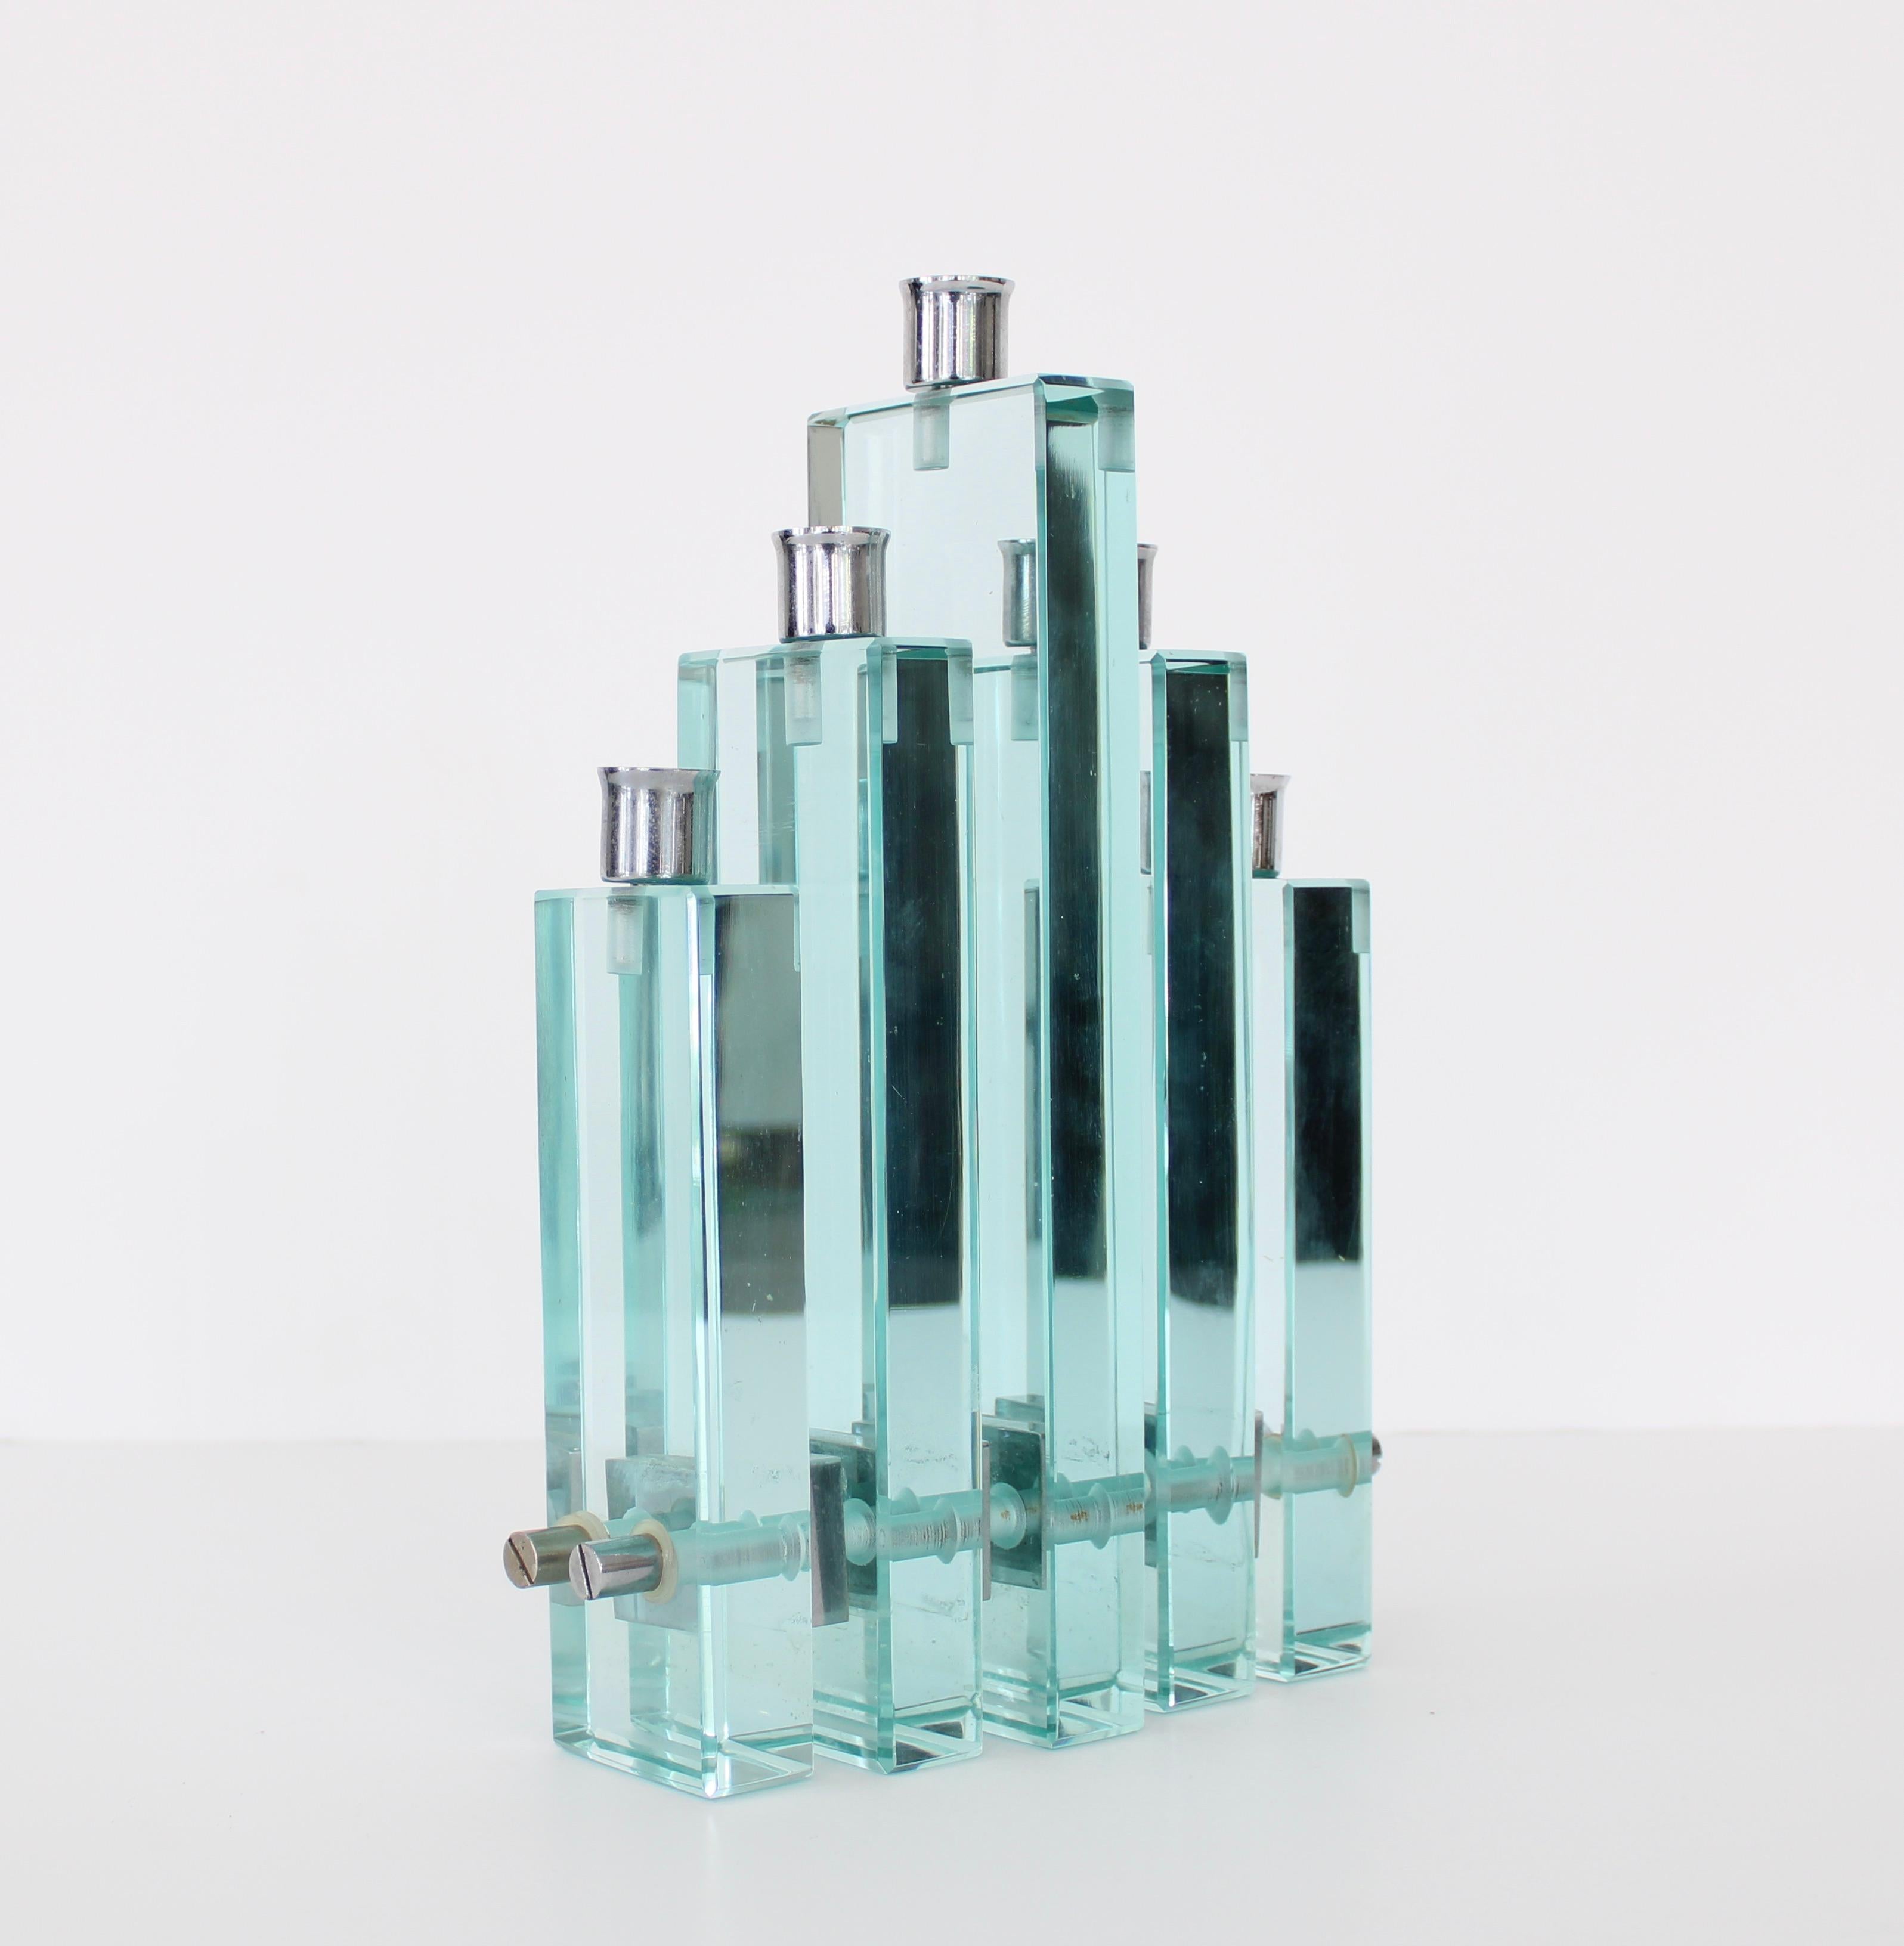 Fontana Arte designed by Pietro Chiesa iconic green glass Italian 5 part glass candleholder with chrome candleholders and chrome details on sides.
Composed of chrome rods keeping the individual candleholders together terminating in chrome screws.